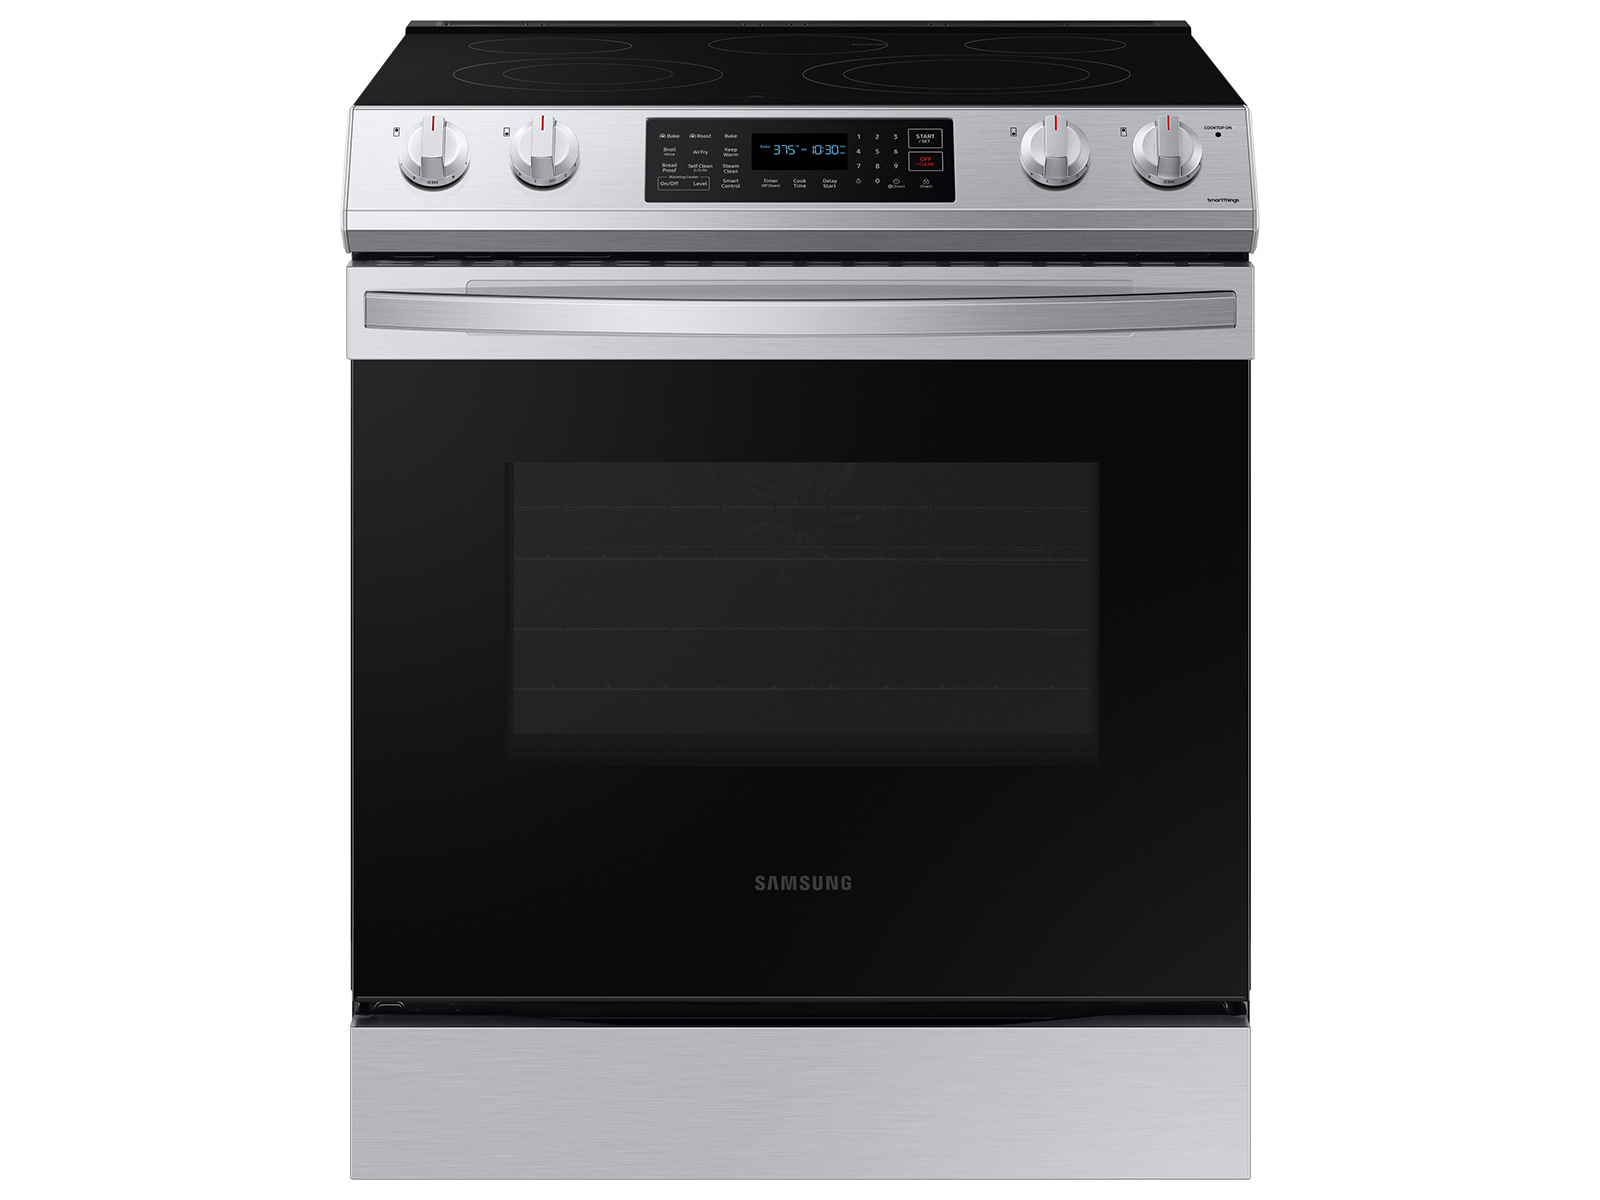 Photos - Cooker Samsung 6.3 cu. ft. Smart Slide-in Electric Range with Air Fry & Convectio 